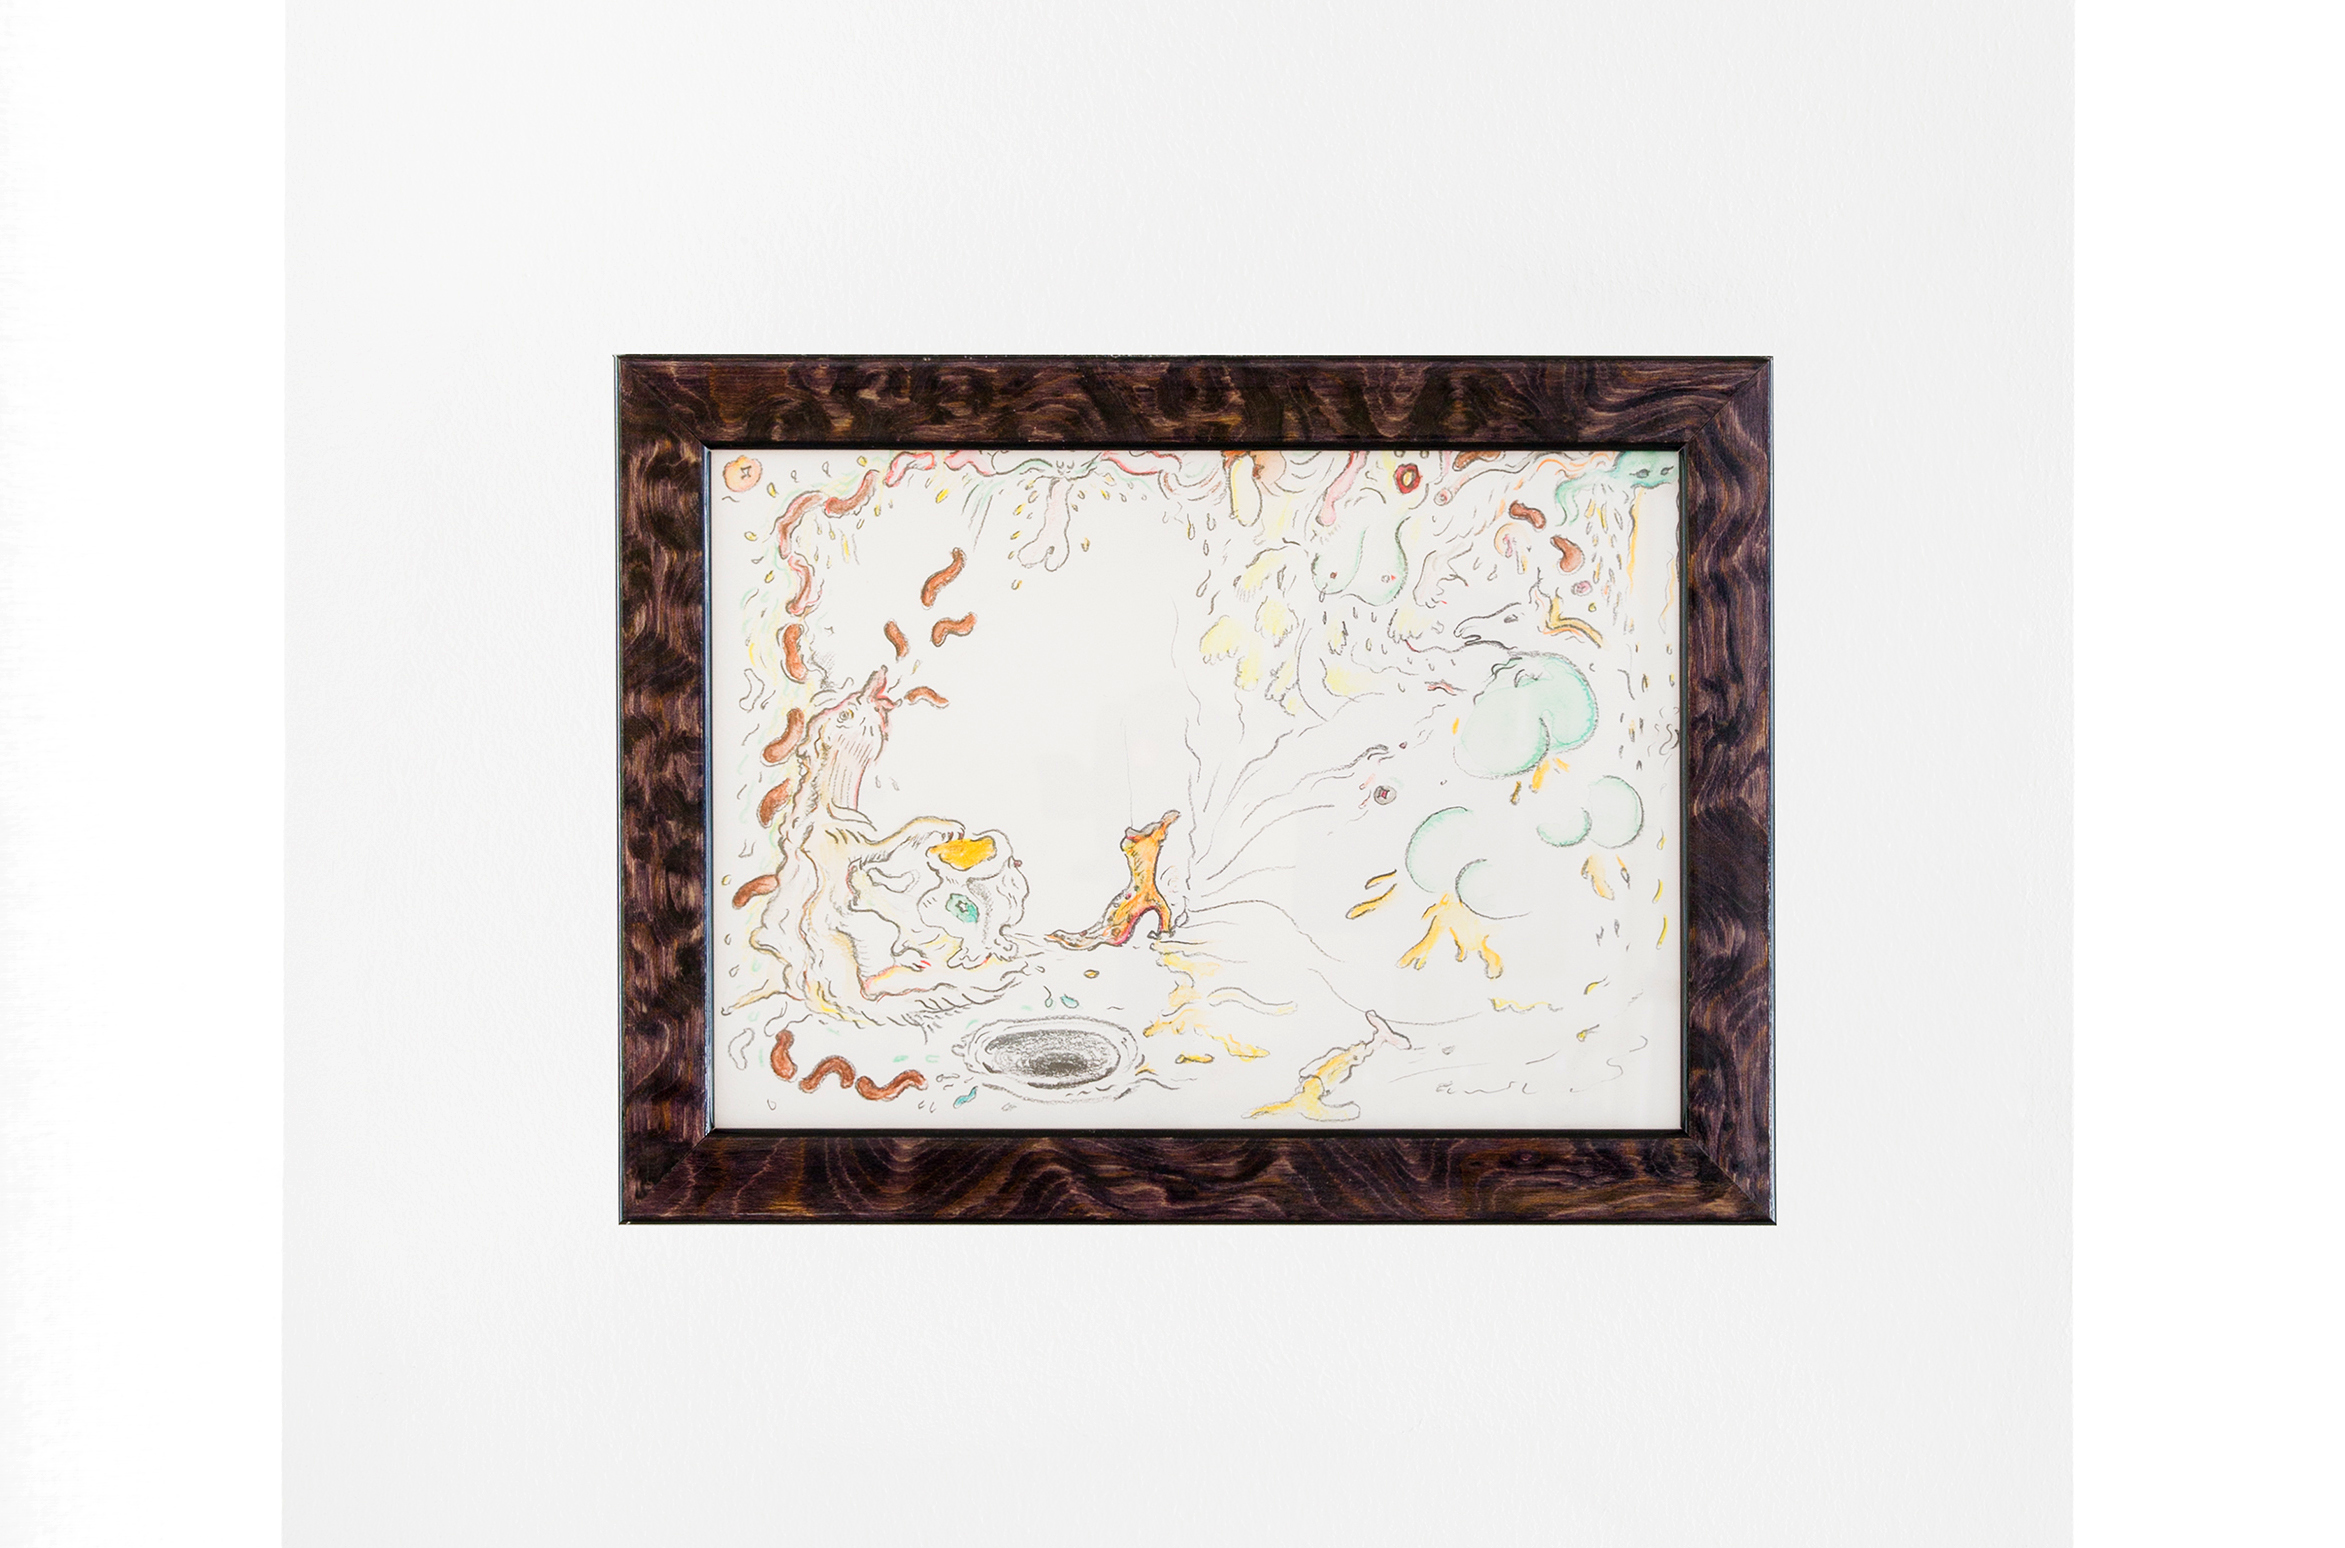 Wet Resistance, Dortmunder Kunstverein, 2022 Zoe Williams, Gate Keeper with Piss Pot and Black Hole, 2018 pencil and watercolours crayon on paper, in artist’s tinted walnut burr frame Photo: Jens Franke  Courtesy: the artist, Ciaccia Levy Paris-Milan